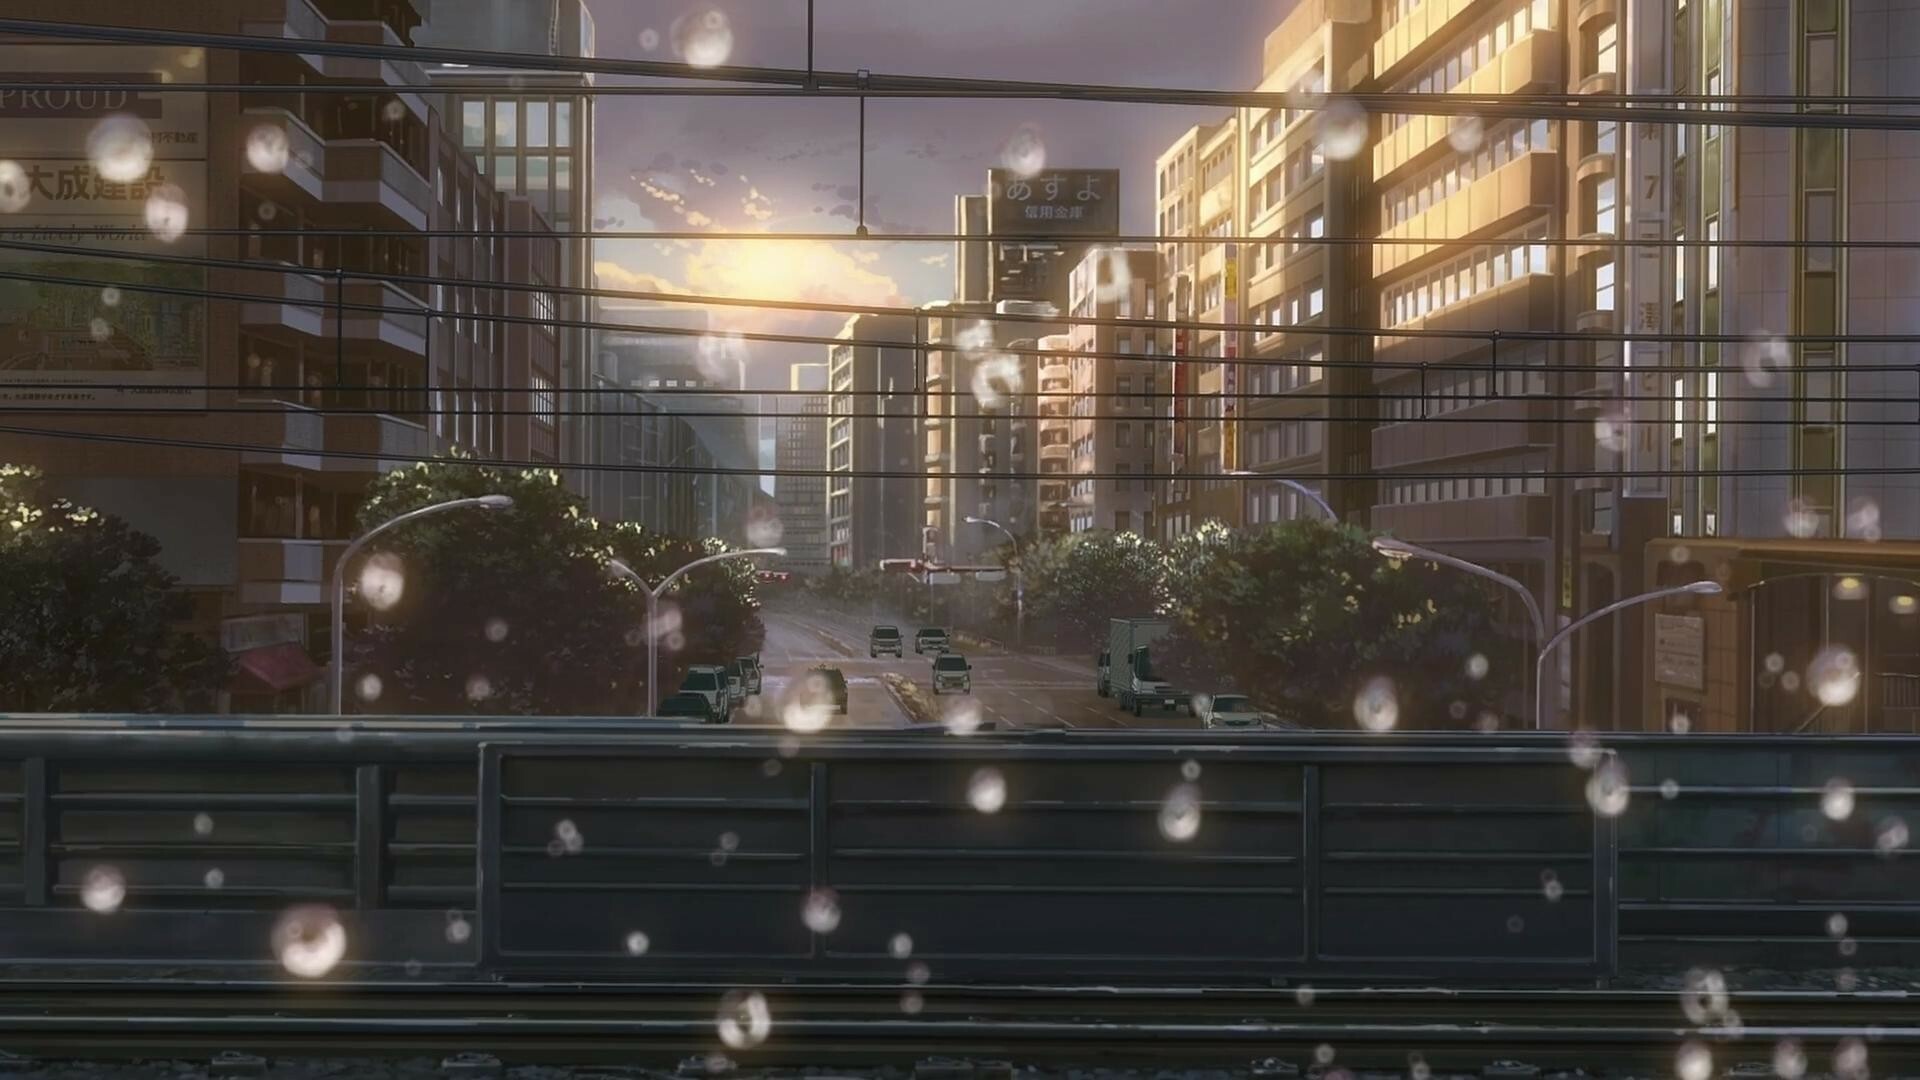 The Garden of Words: Released in May 2013, The fifth film Makoto Shinkai has directed. 1920x1080 Full HD Wallpaper.